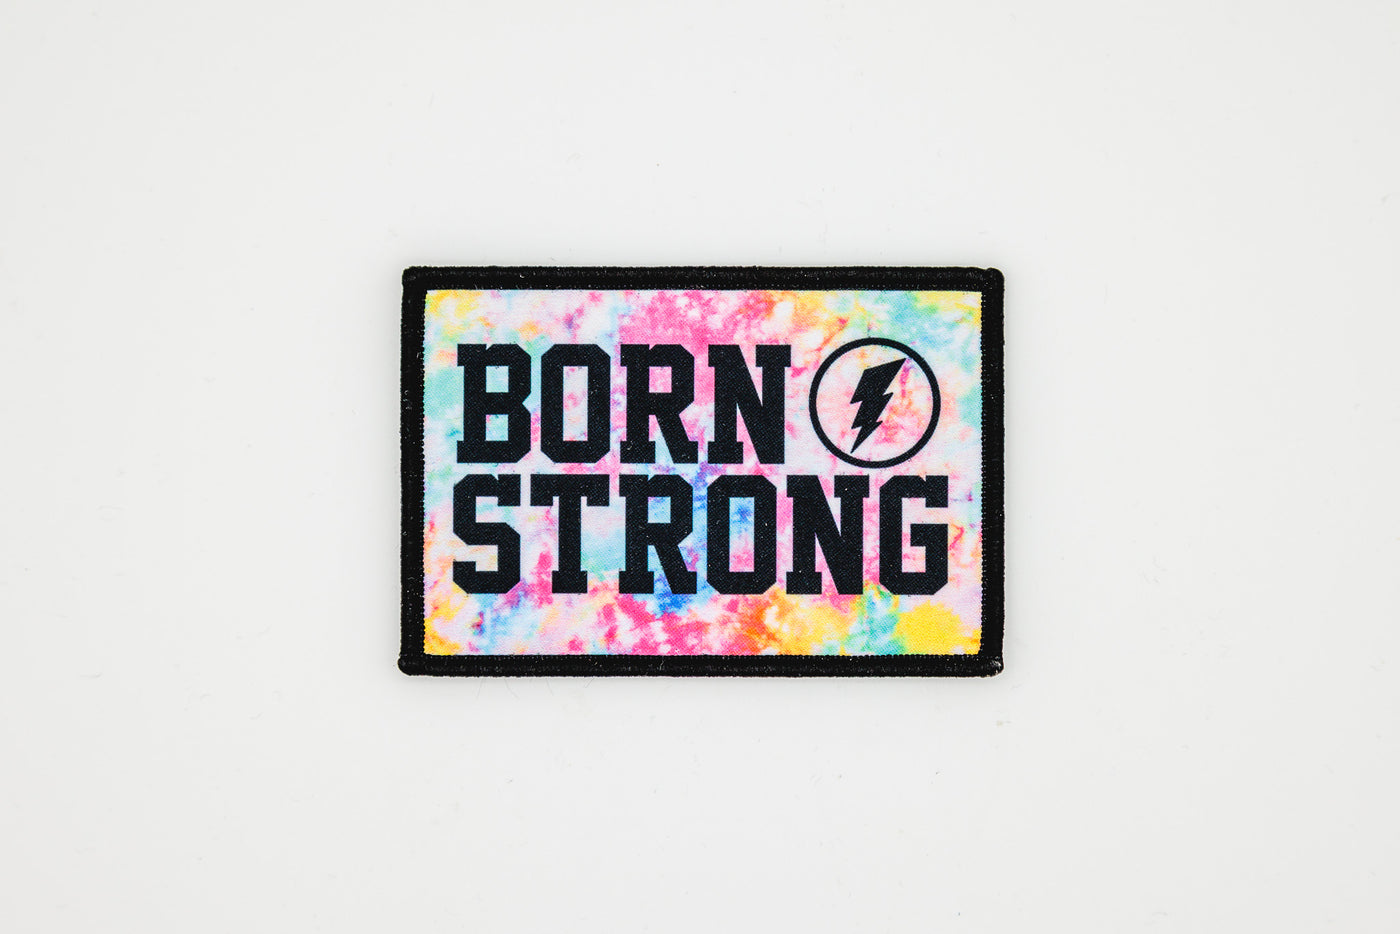 BORN STRONG TIE DYE patch